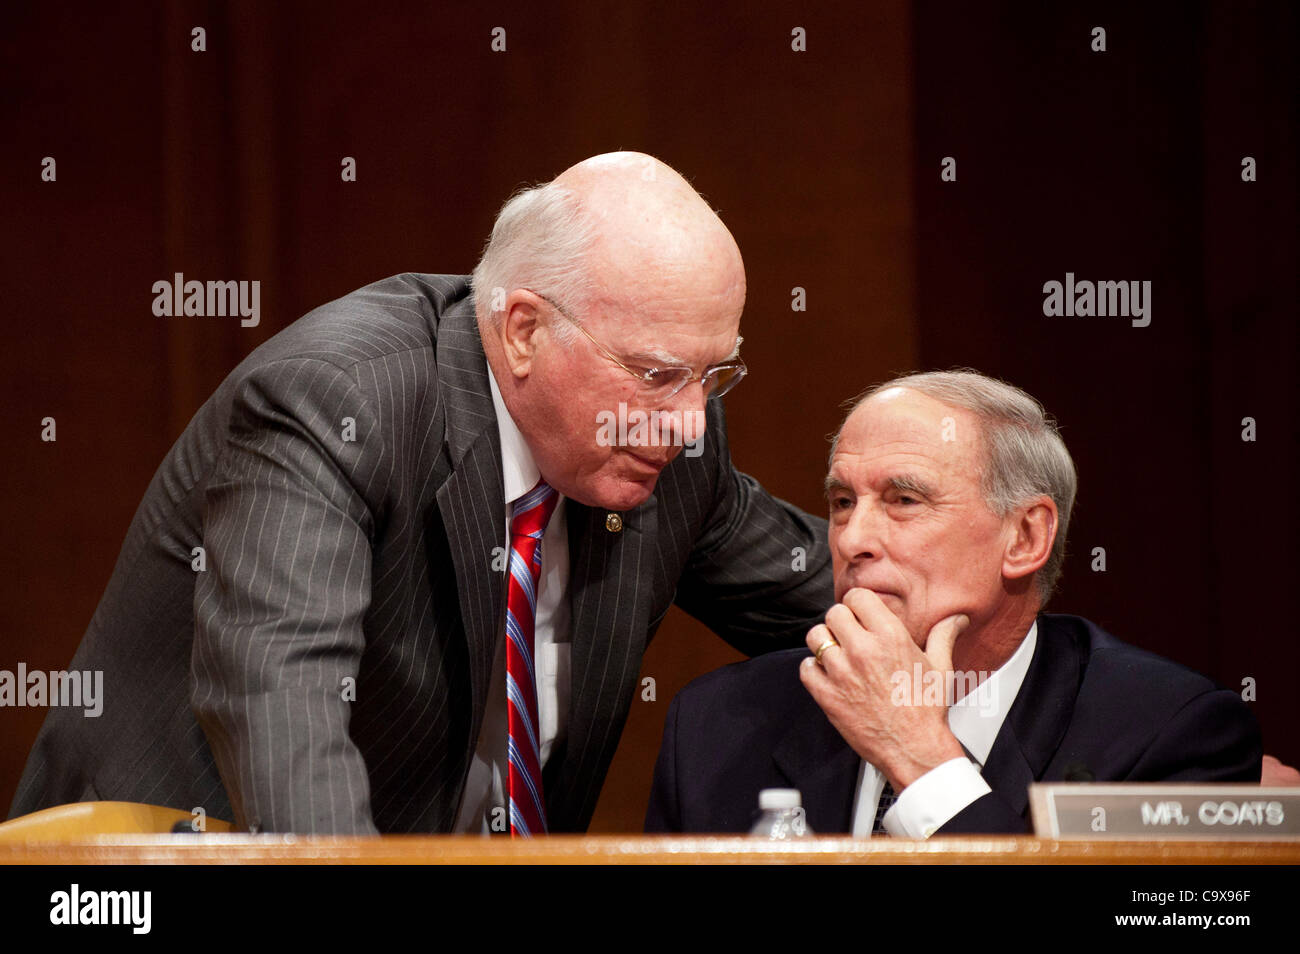 Feb. 28, 2012 - Washington, District of Columbia, U.S. - Senators PATRICK LEAHY (D-VT) and DAN COATS (R-IN) confer as Secretary of State Hillary Clinton testifies on the FY2013 Dept. of State and Foreign Operations Budget before the Senate Appropriations Committee on Capitol Hill Tuesday. (Credit Im Stock Photo